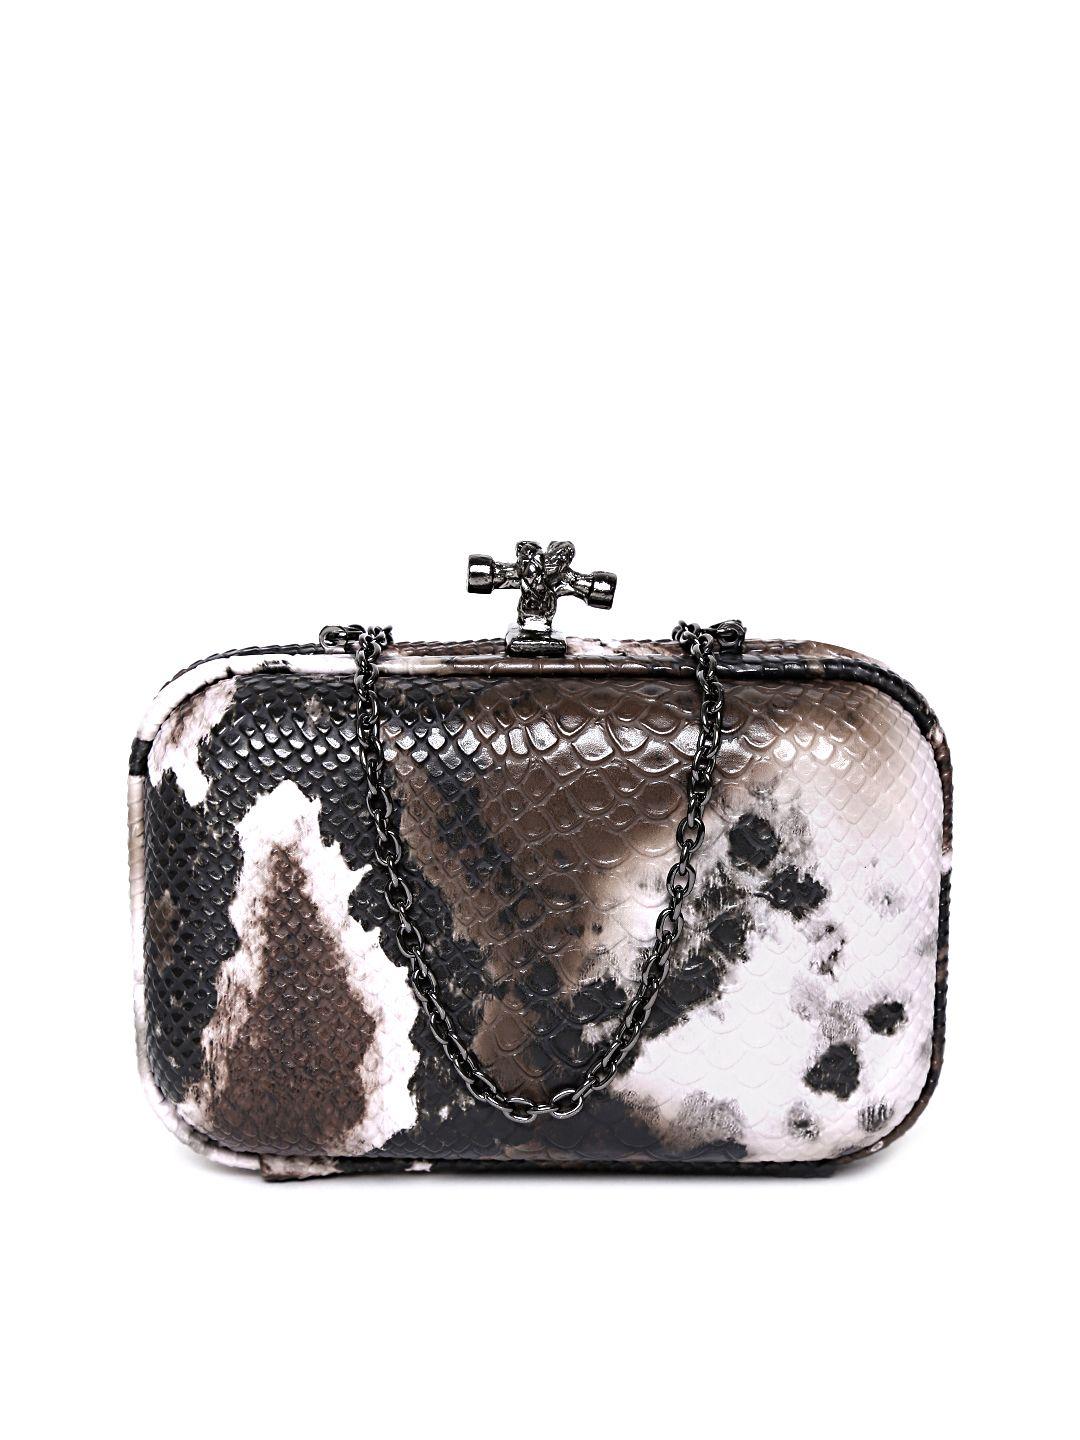 giordano brown & black snakeskin-textured box clutch with chain strap